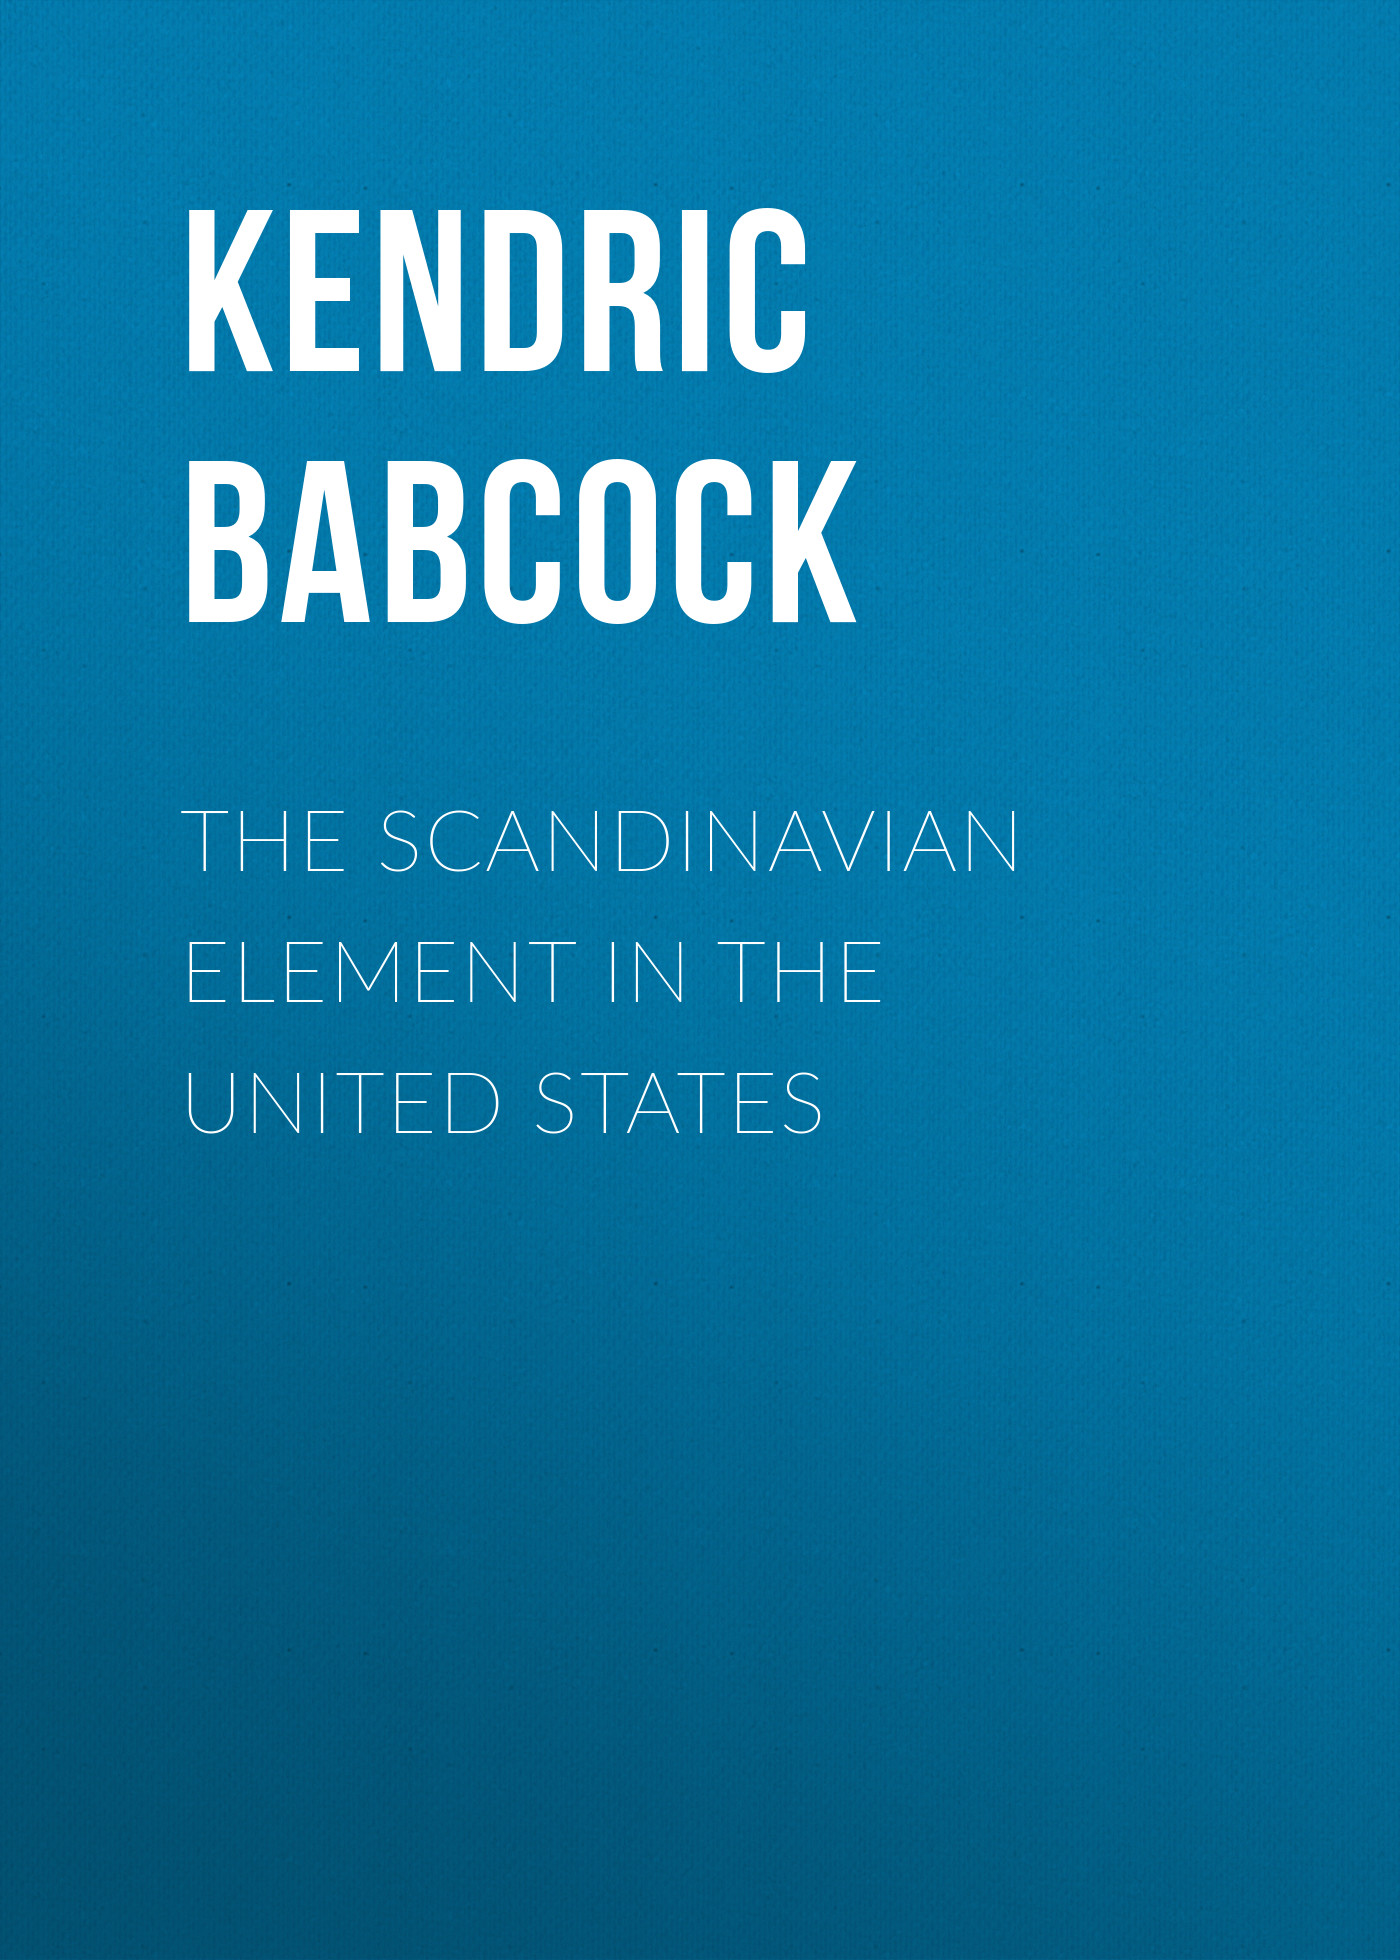 The Scandinavian Element in the United States